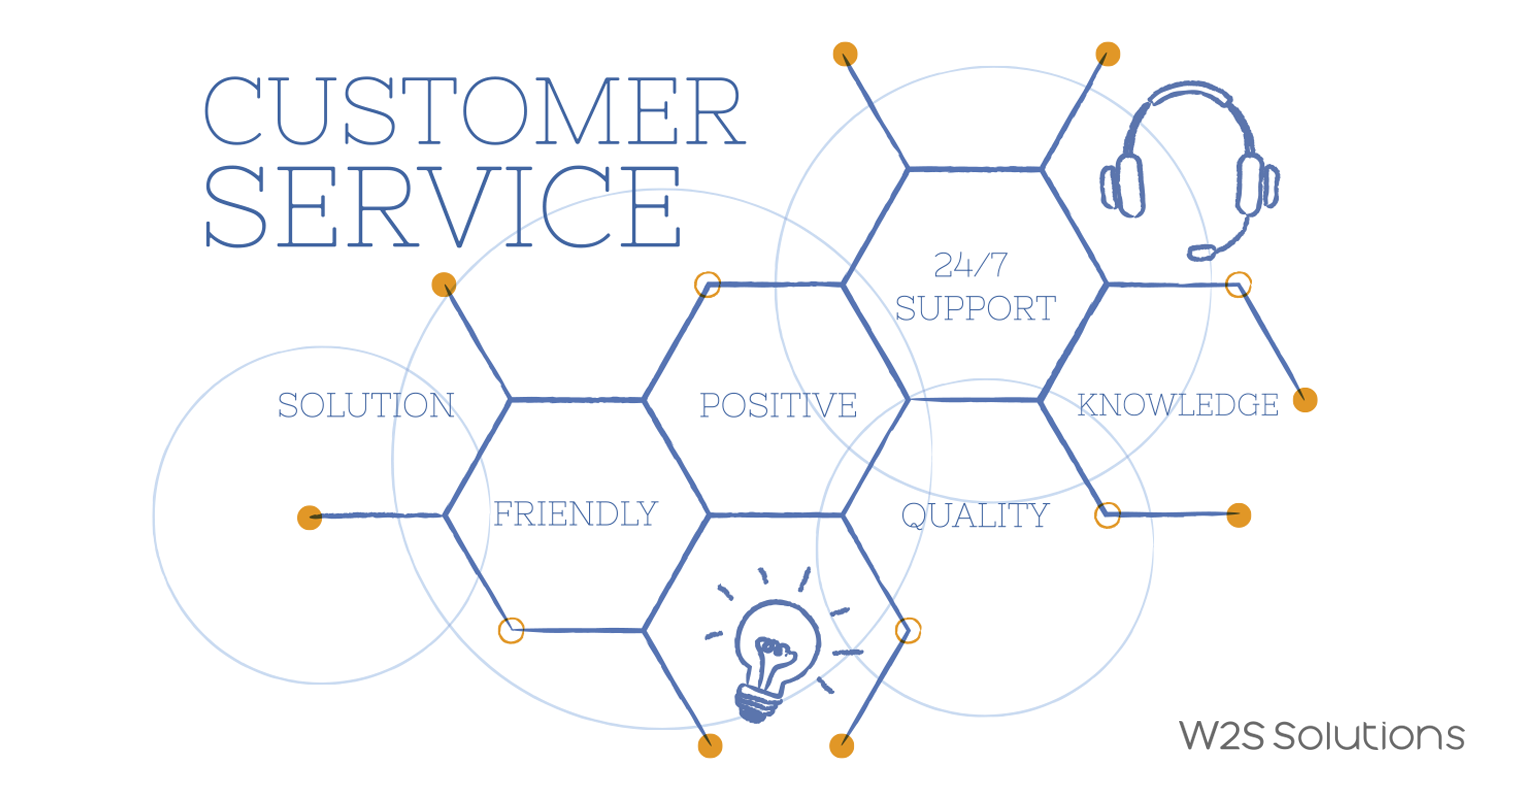 Customer service at the 21st century: A guide to branding